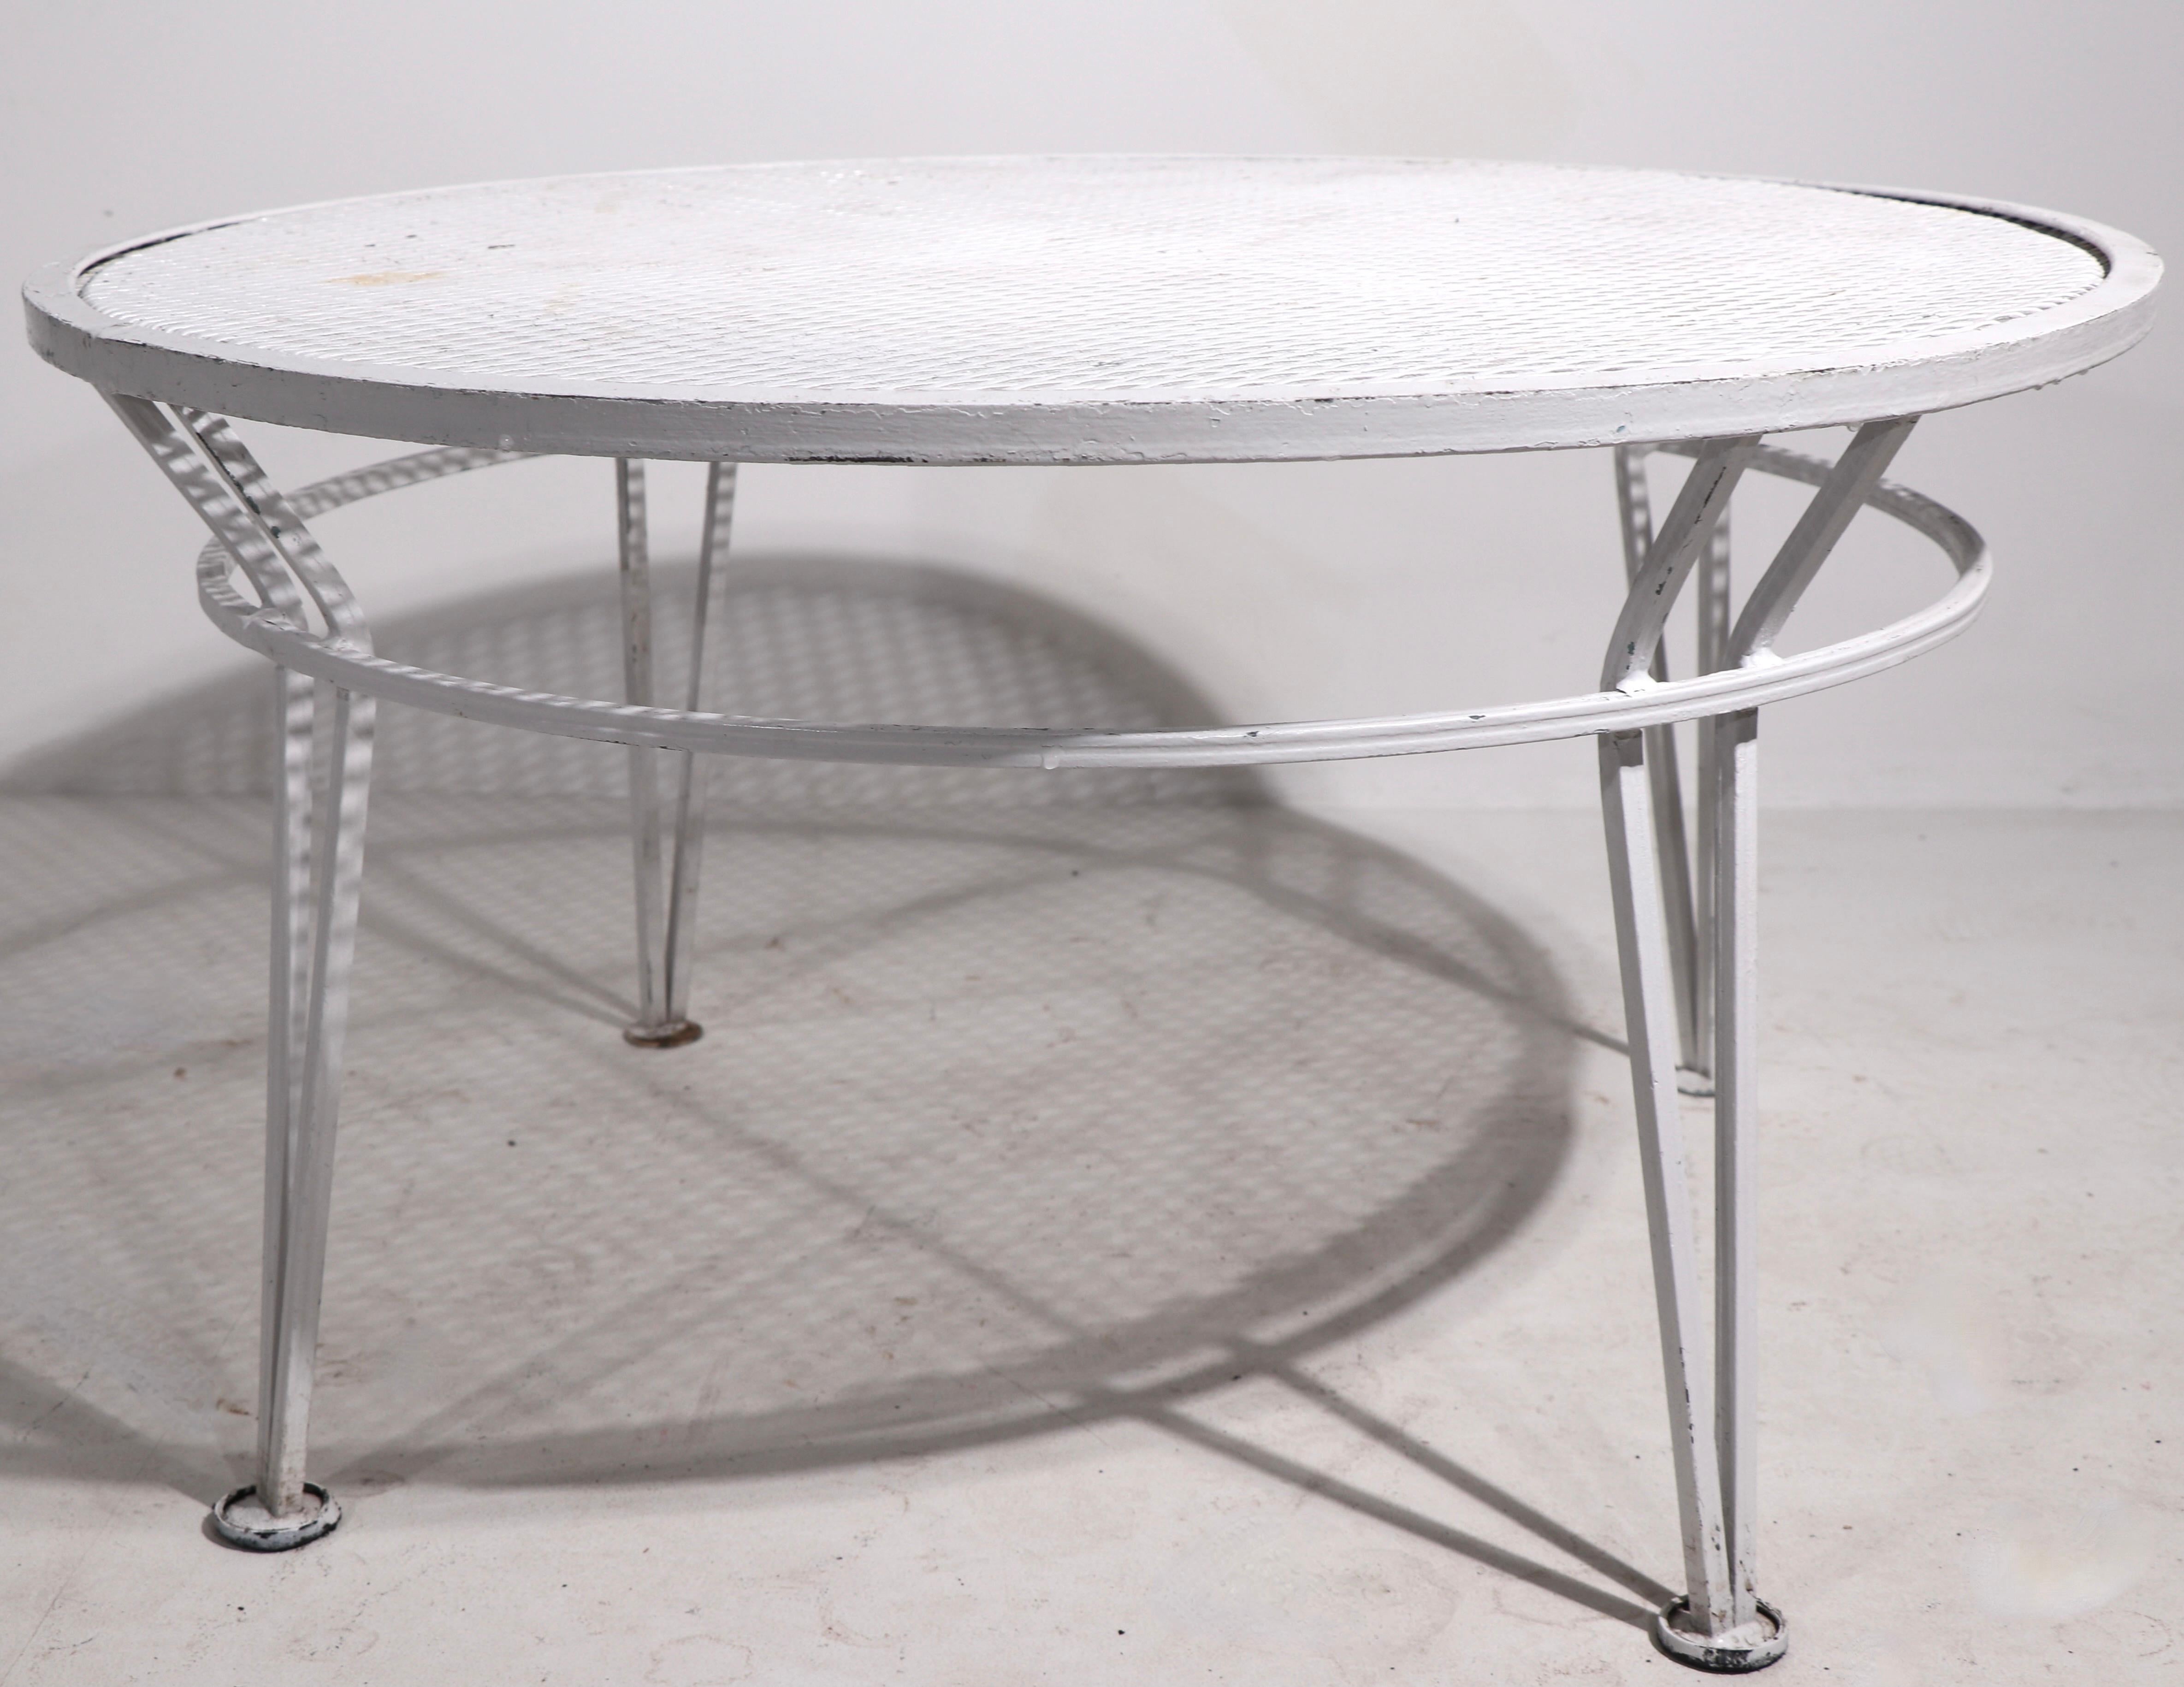 Chic architectural style wrought iron and metal mesh coffee table from the Radar series, by Salterini. This example is in very good condition, it is in newer white paint finish, showing only light cosmetic wear normal and consistent with